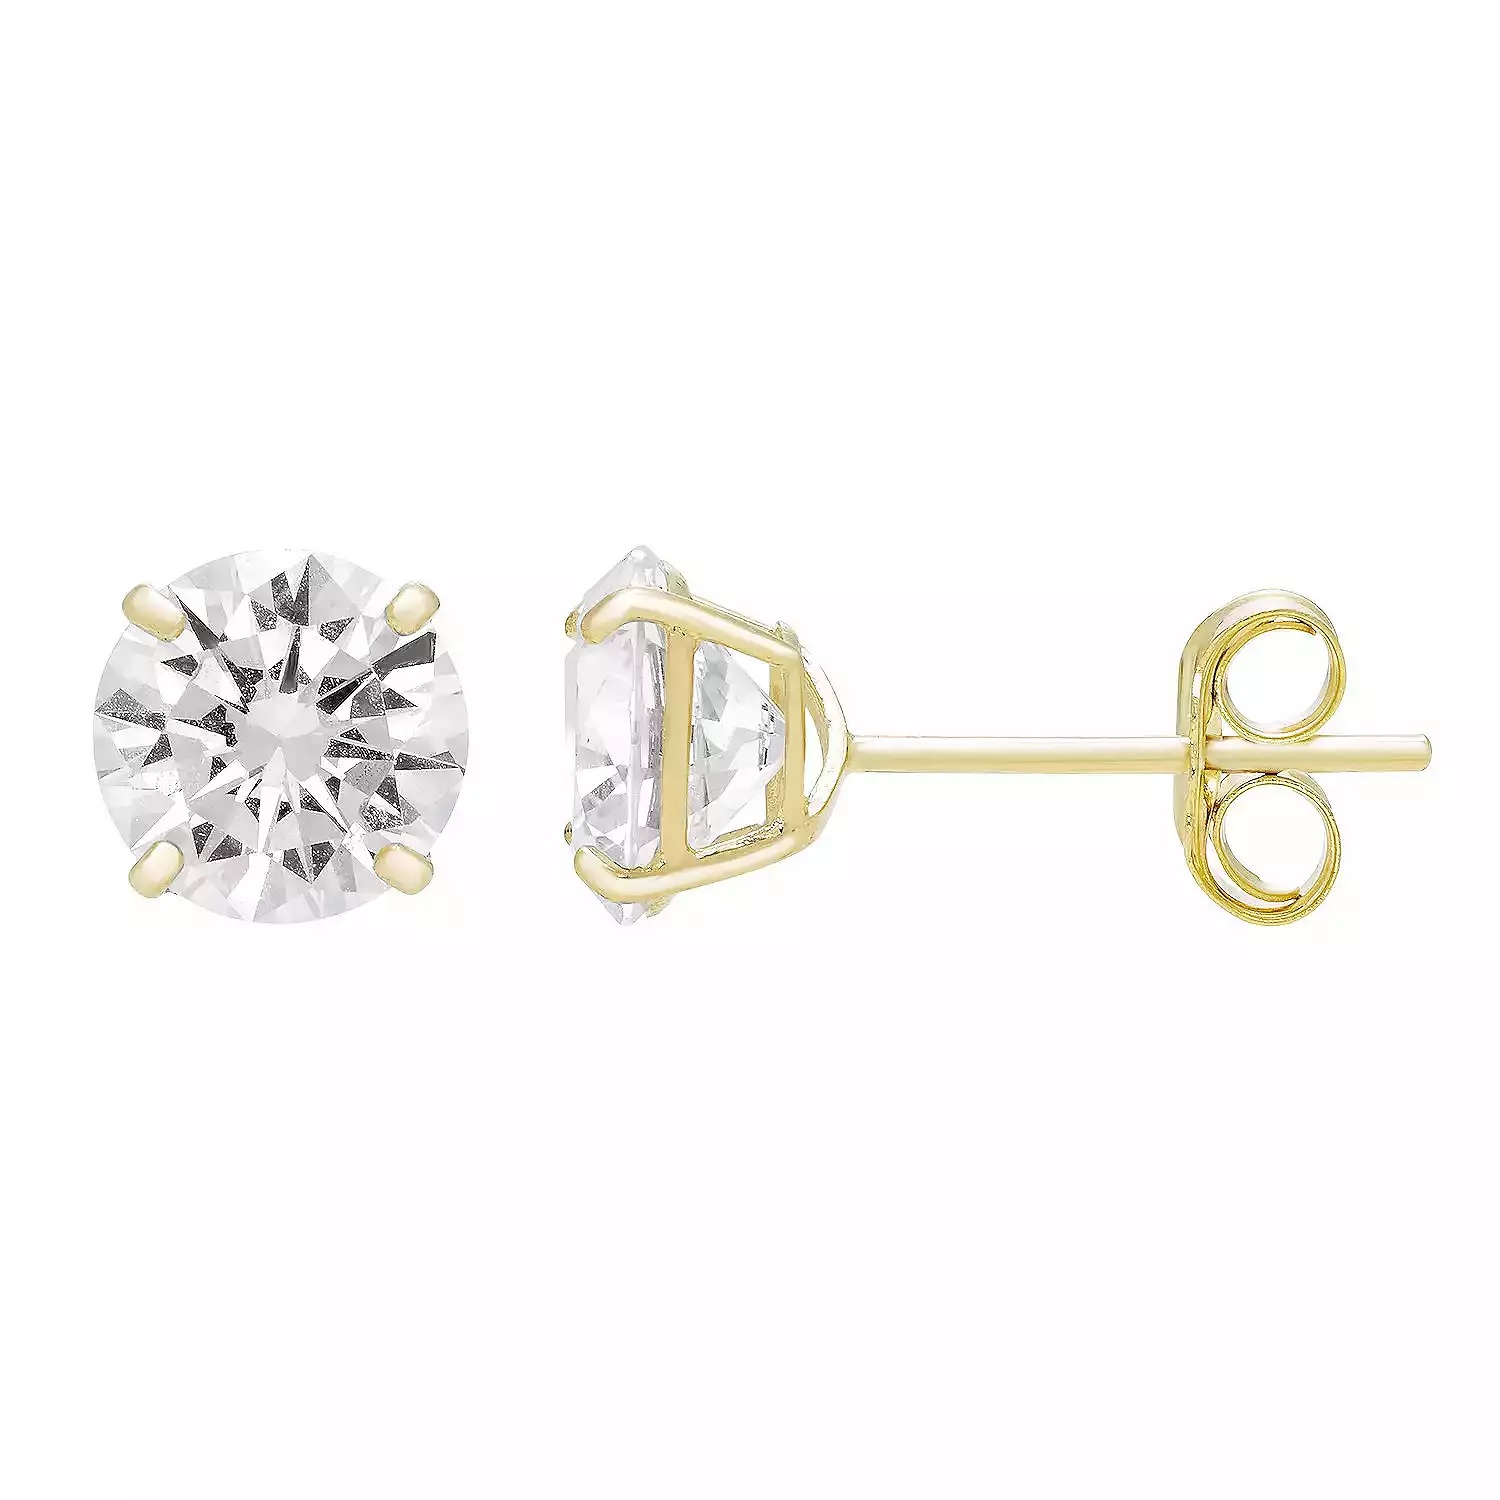 A&M 14k Gold 4mm to 8mm Round Clear CZ Stud Earrings, for Women, Girls, Unisex - image 1 of 3